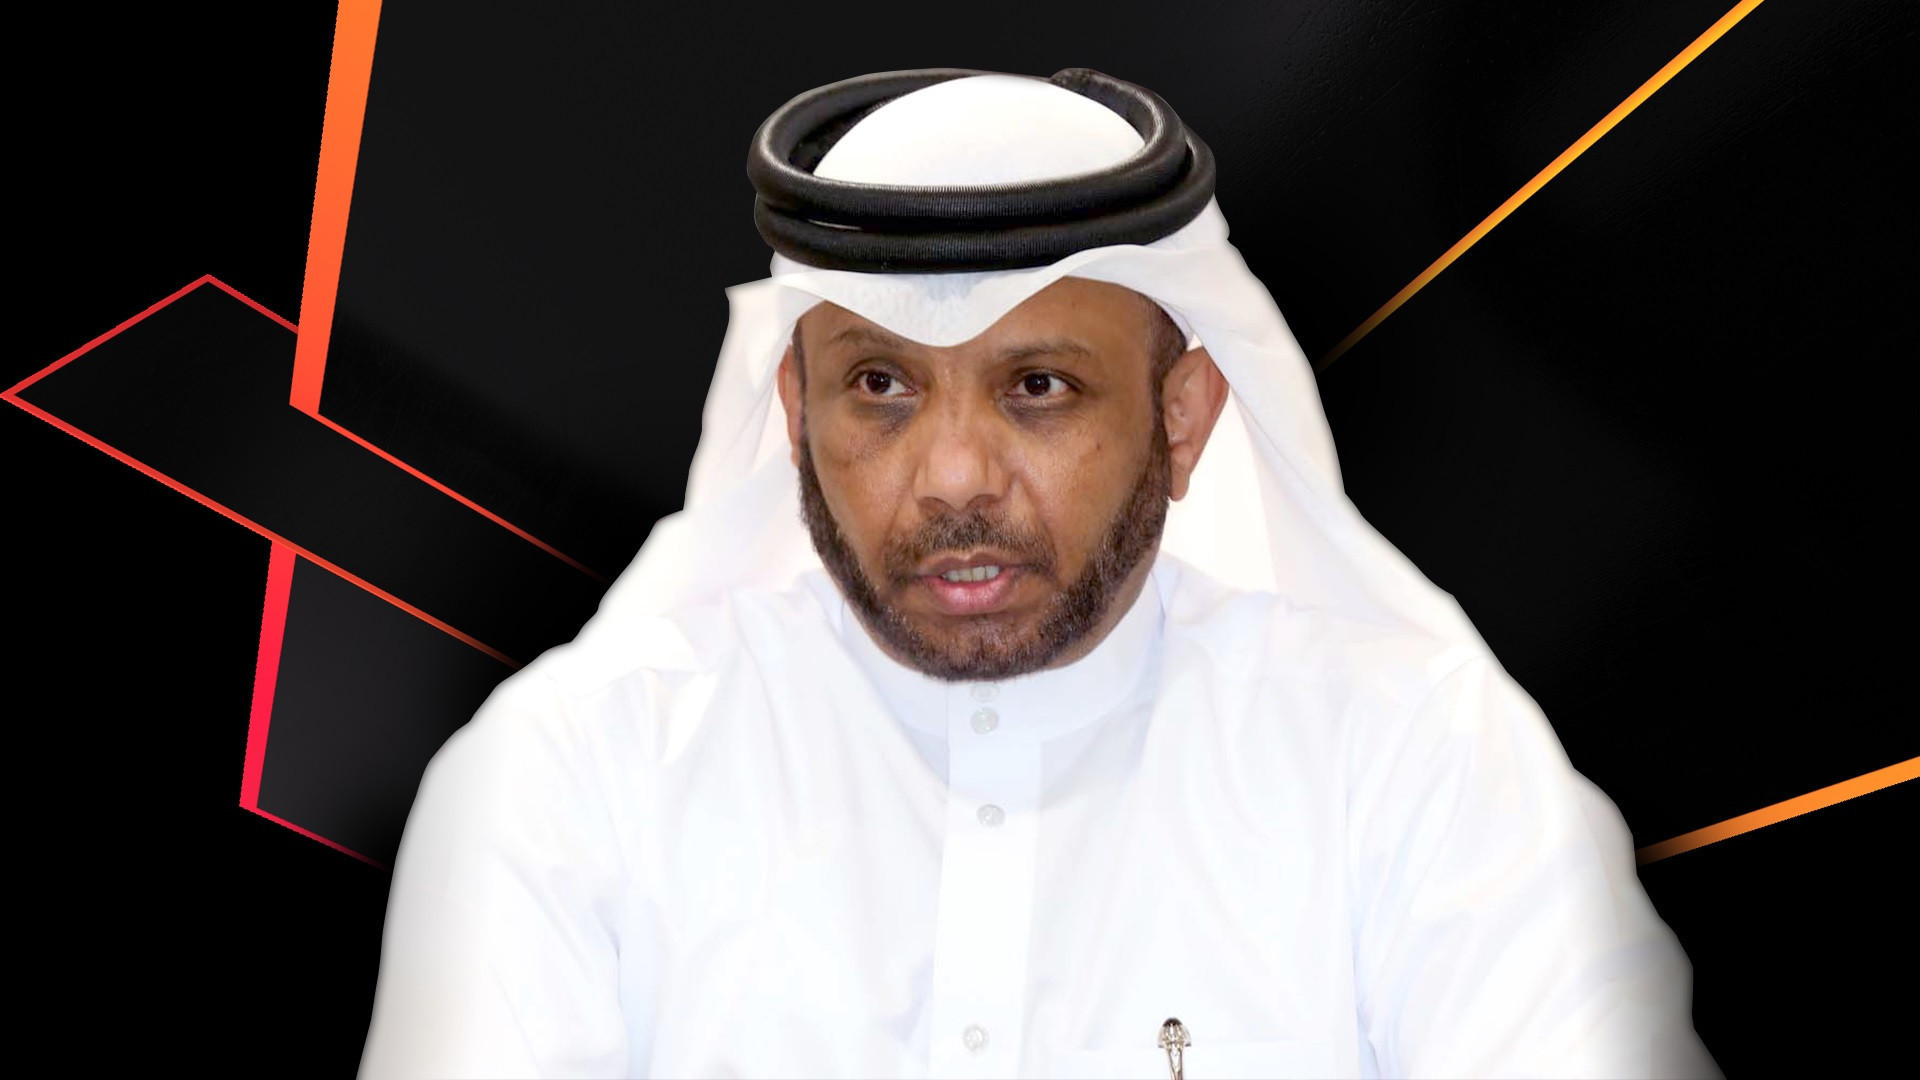 Khalil Al-Mohannadi has been elected President of the Asian Table Tennis Union ©World Table Tennis